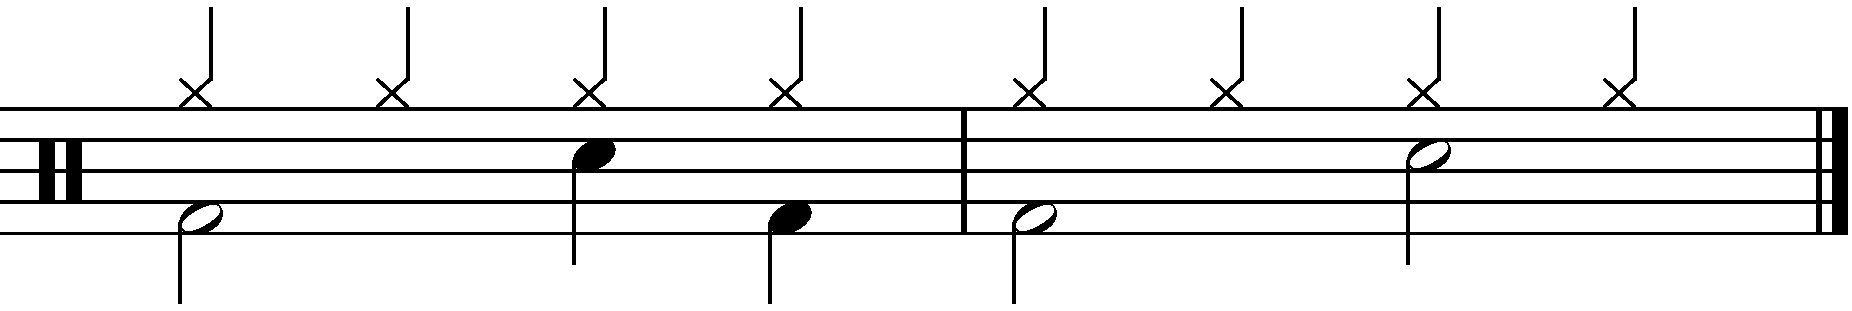 An example of a half time groove